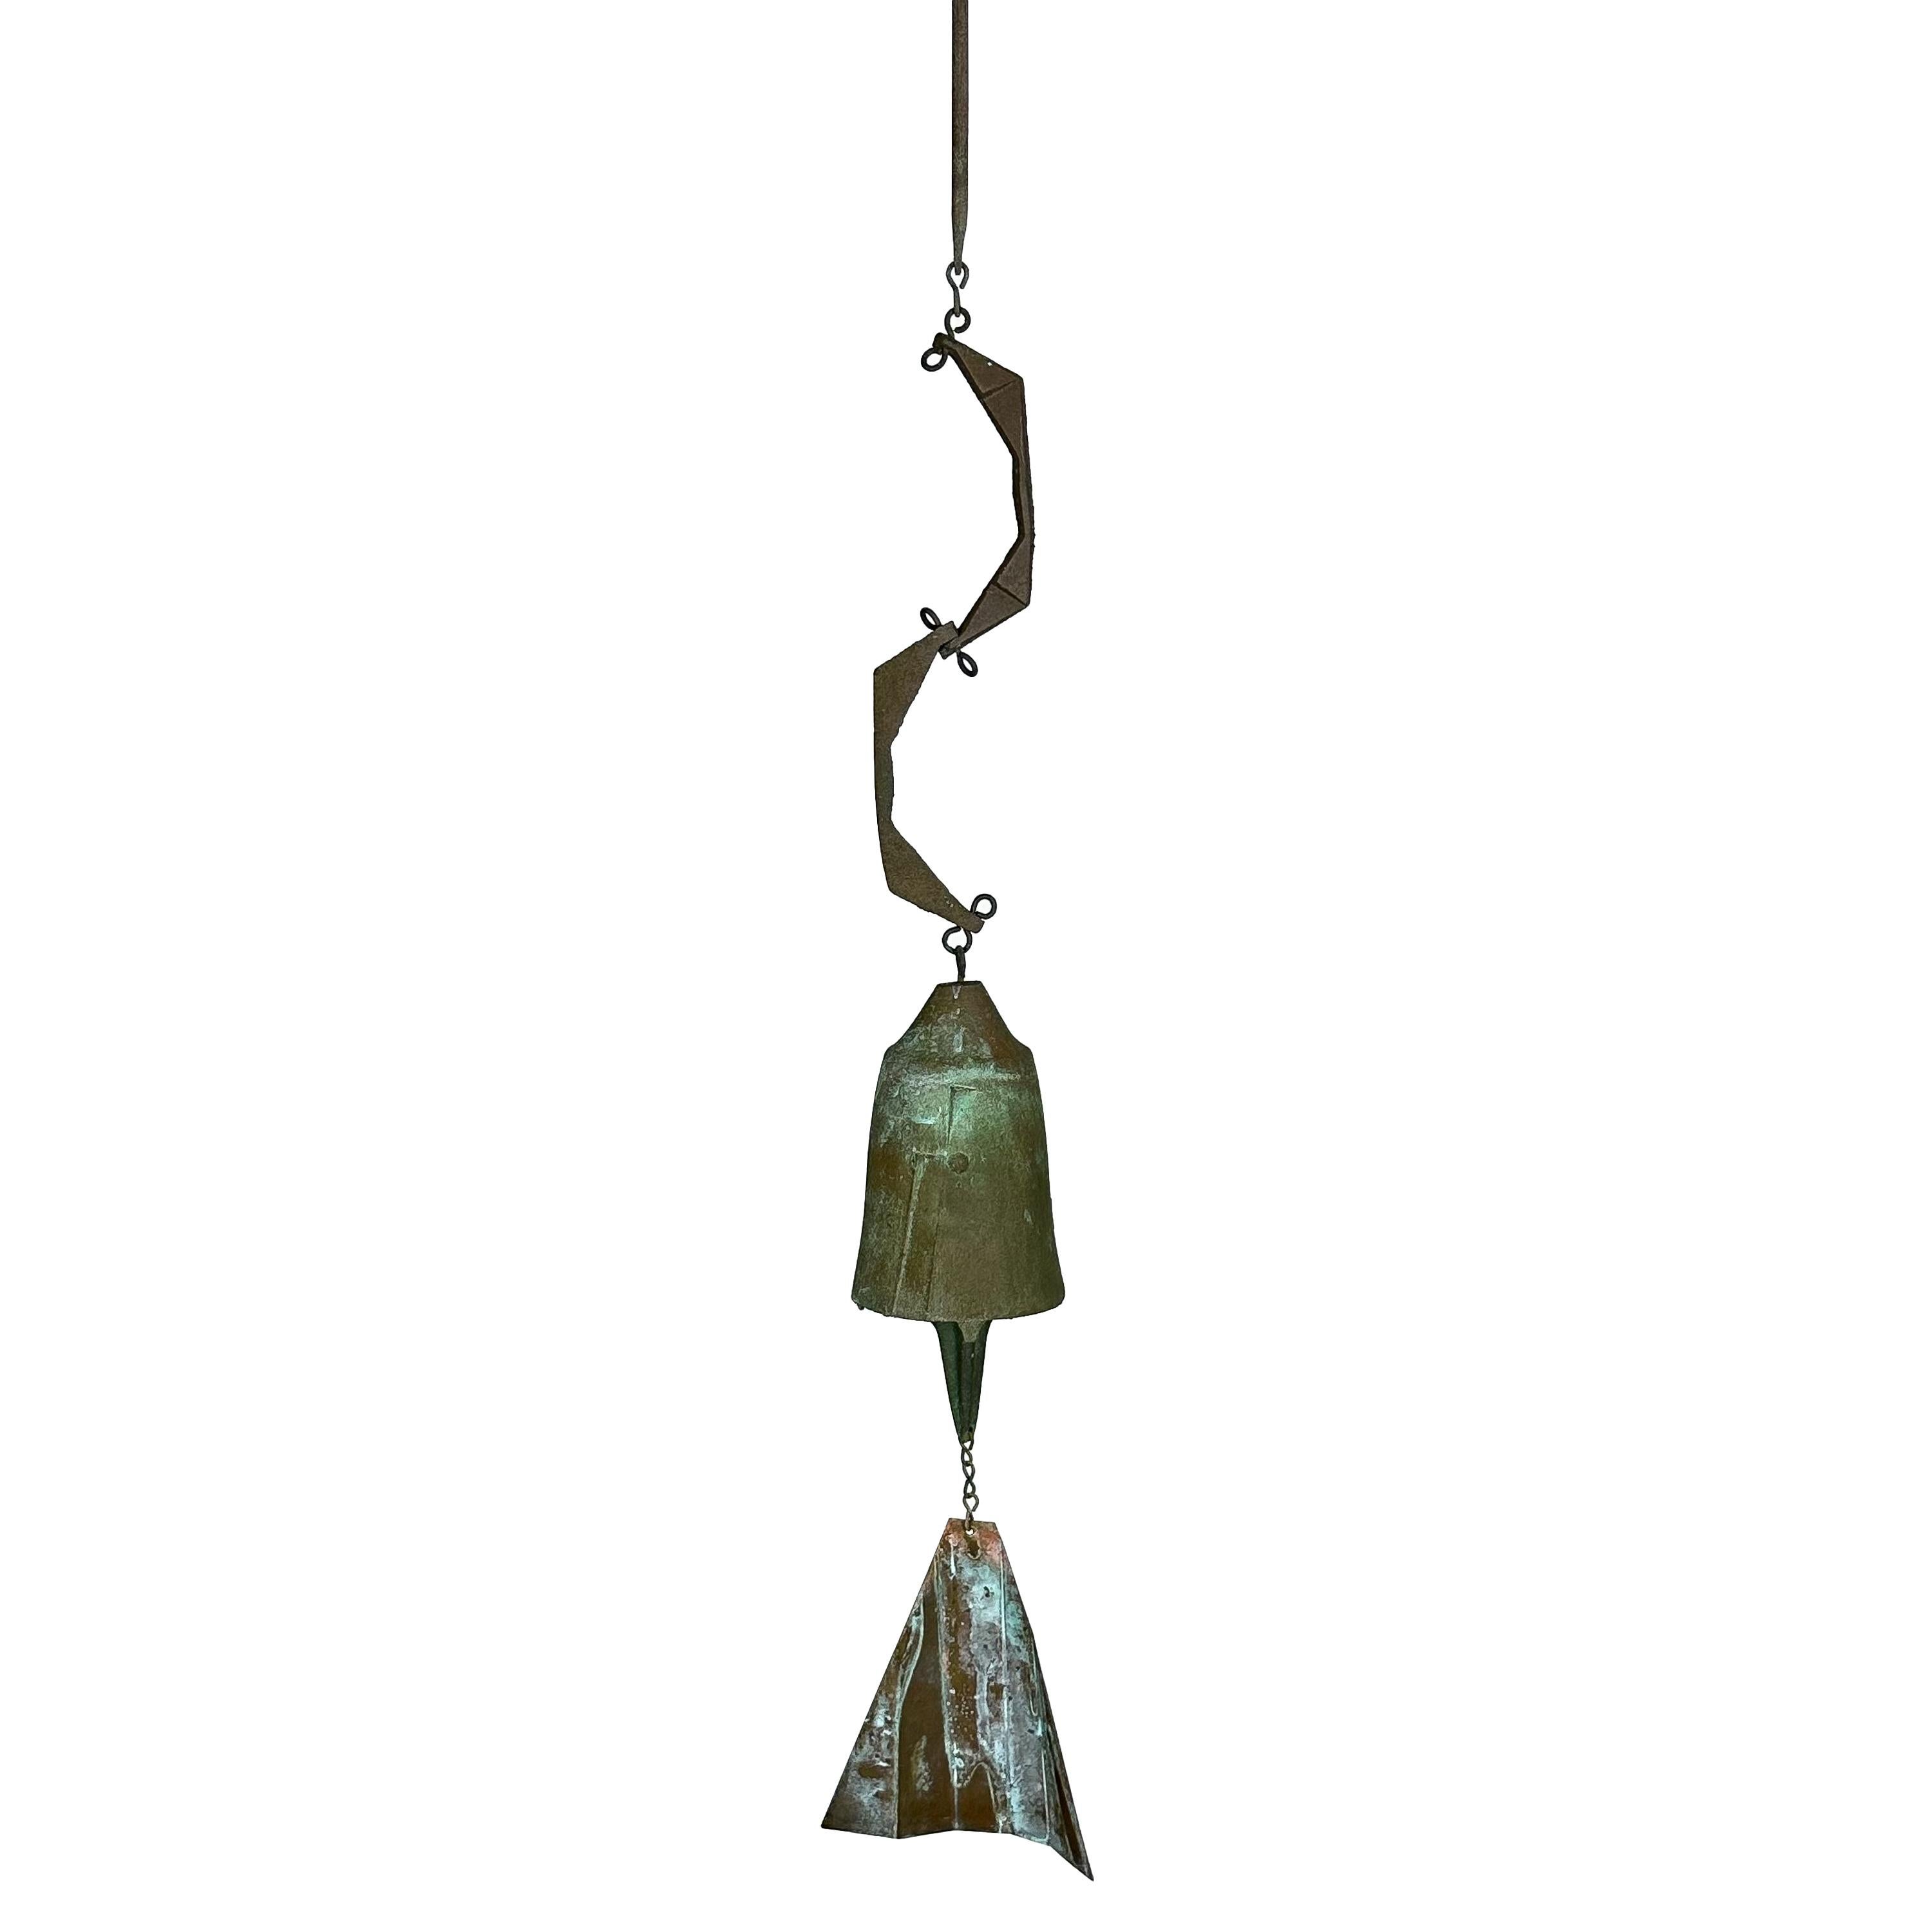 A set of 3 bronze bells / wind chimes designed by architect, Paolo Soleri for Arcosanti , circa 1970s. These gorgeous cast solid bronze Soleri bell features a beautiful patina, abstract design on the bells and unique bronze elements. Completely